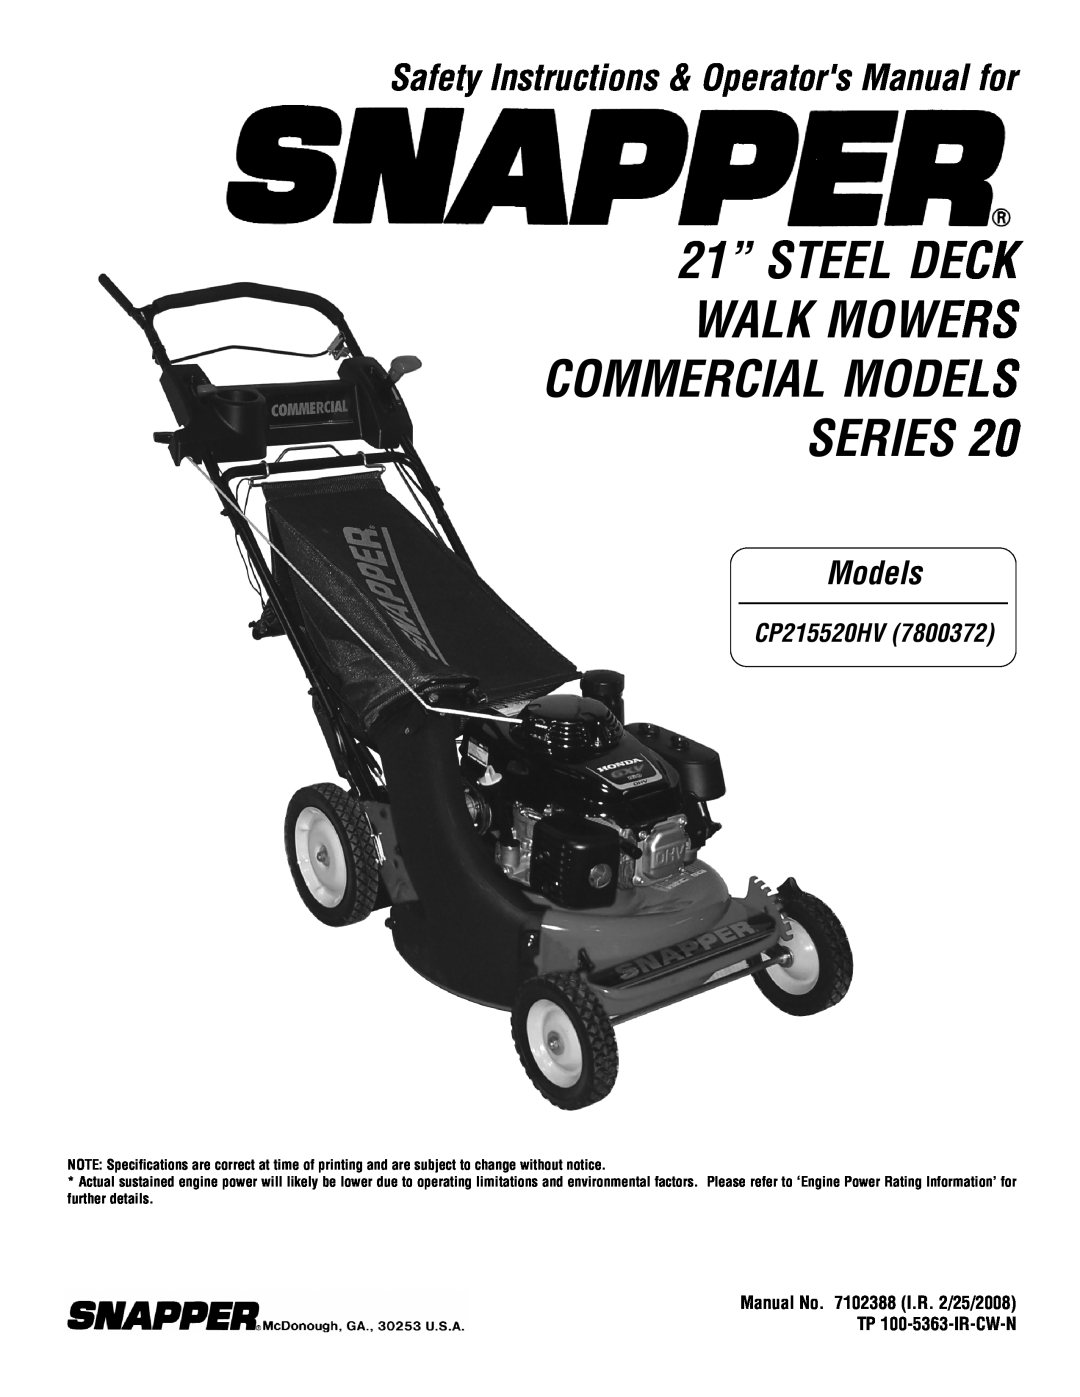 Snapper CP215520HV specifications 21” STEEL DECK WALK MOWERS COMMERCIAL MODELS SERIES, Models 